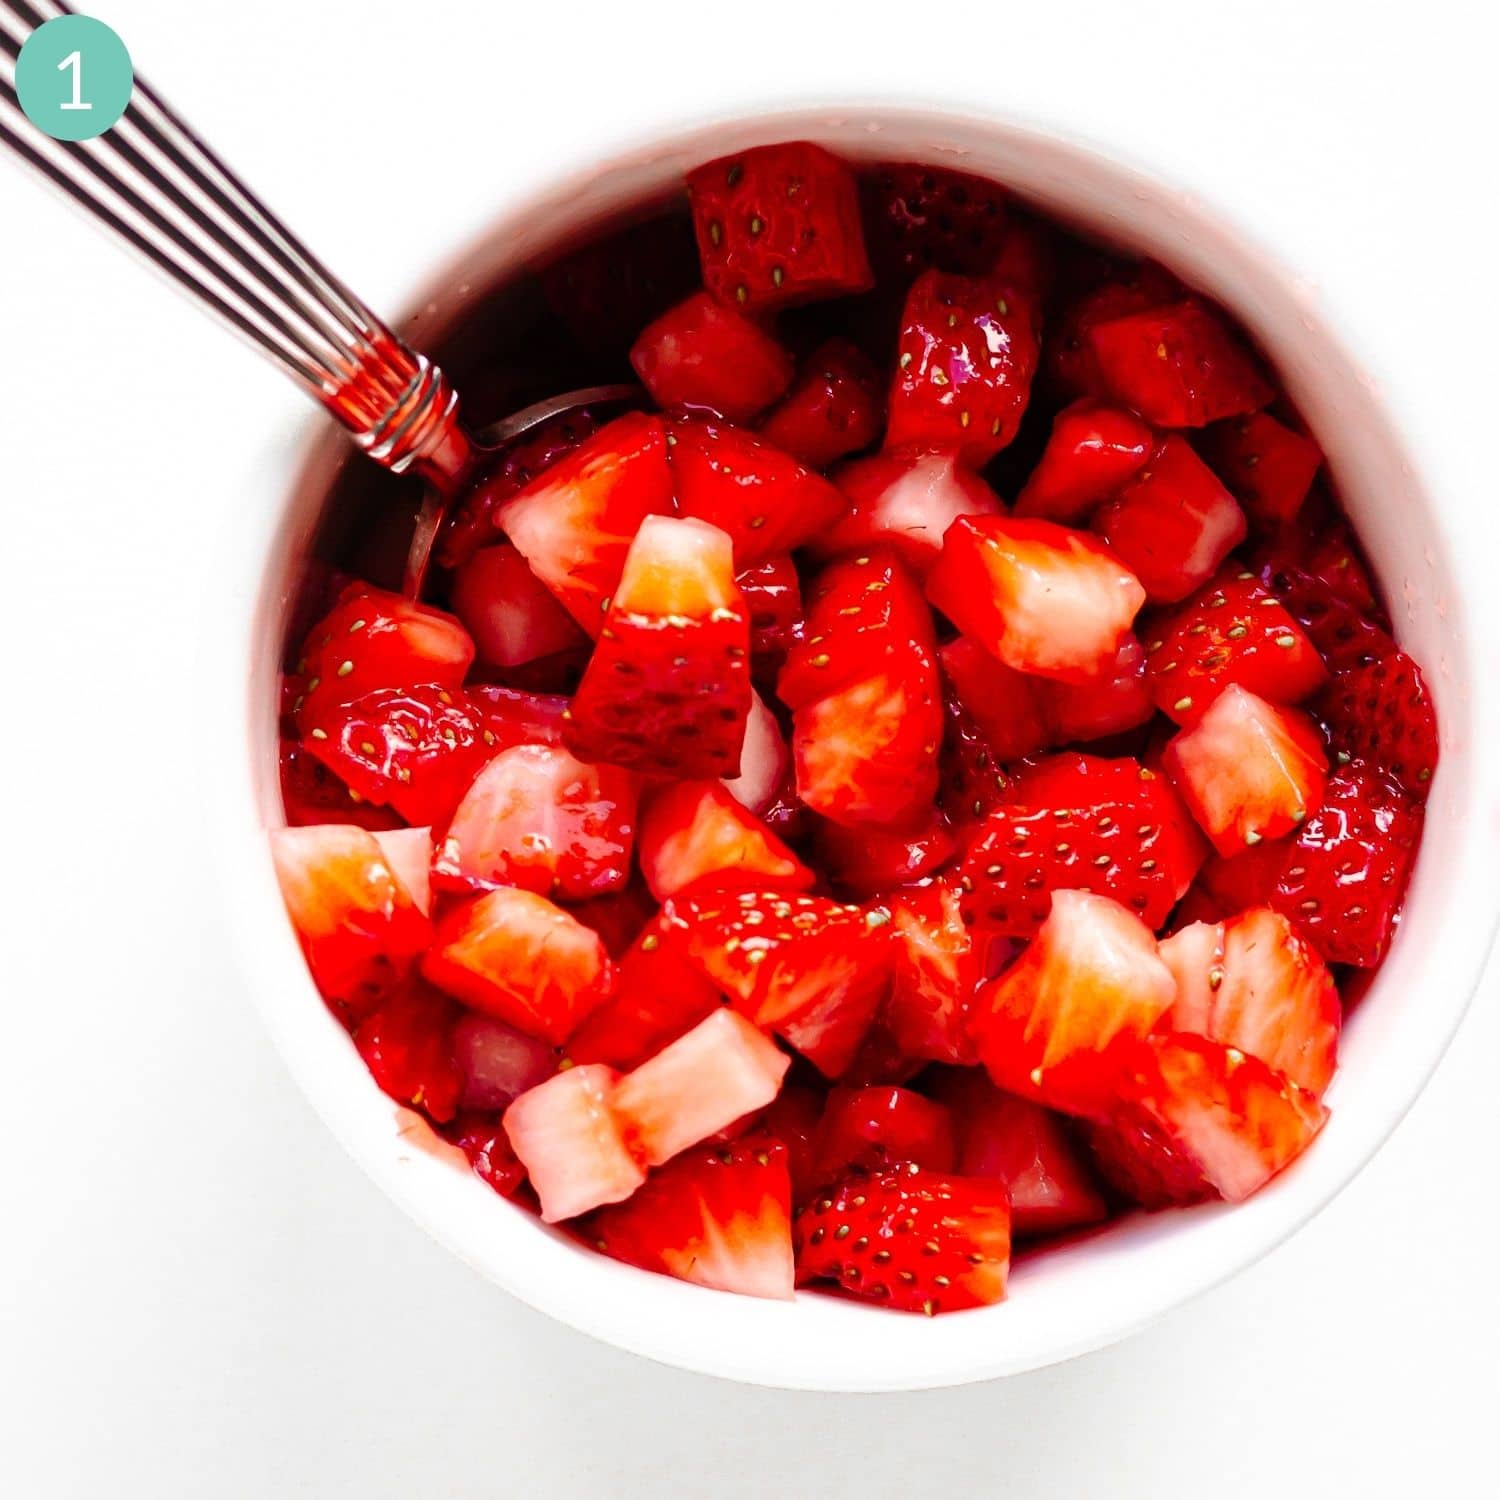 Chopped strawberries in a white bowl with spoon sticking out.